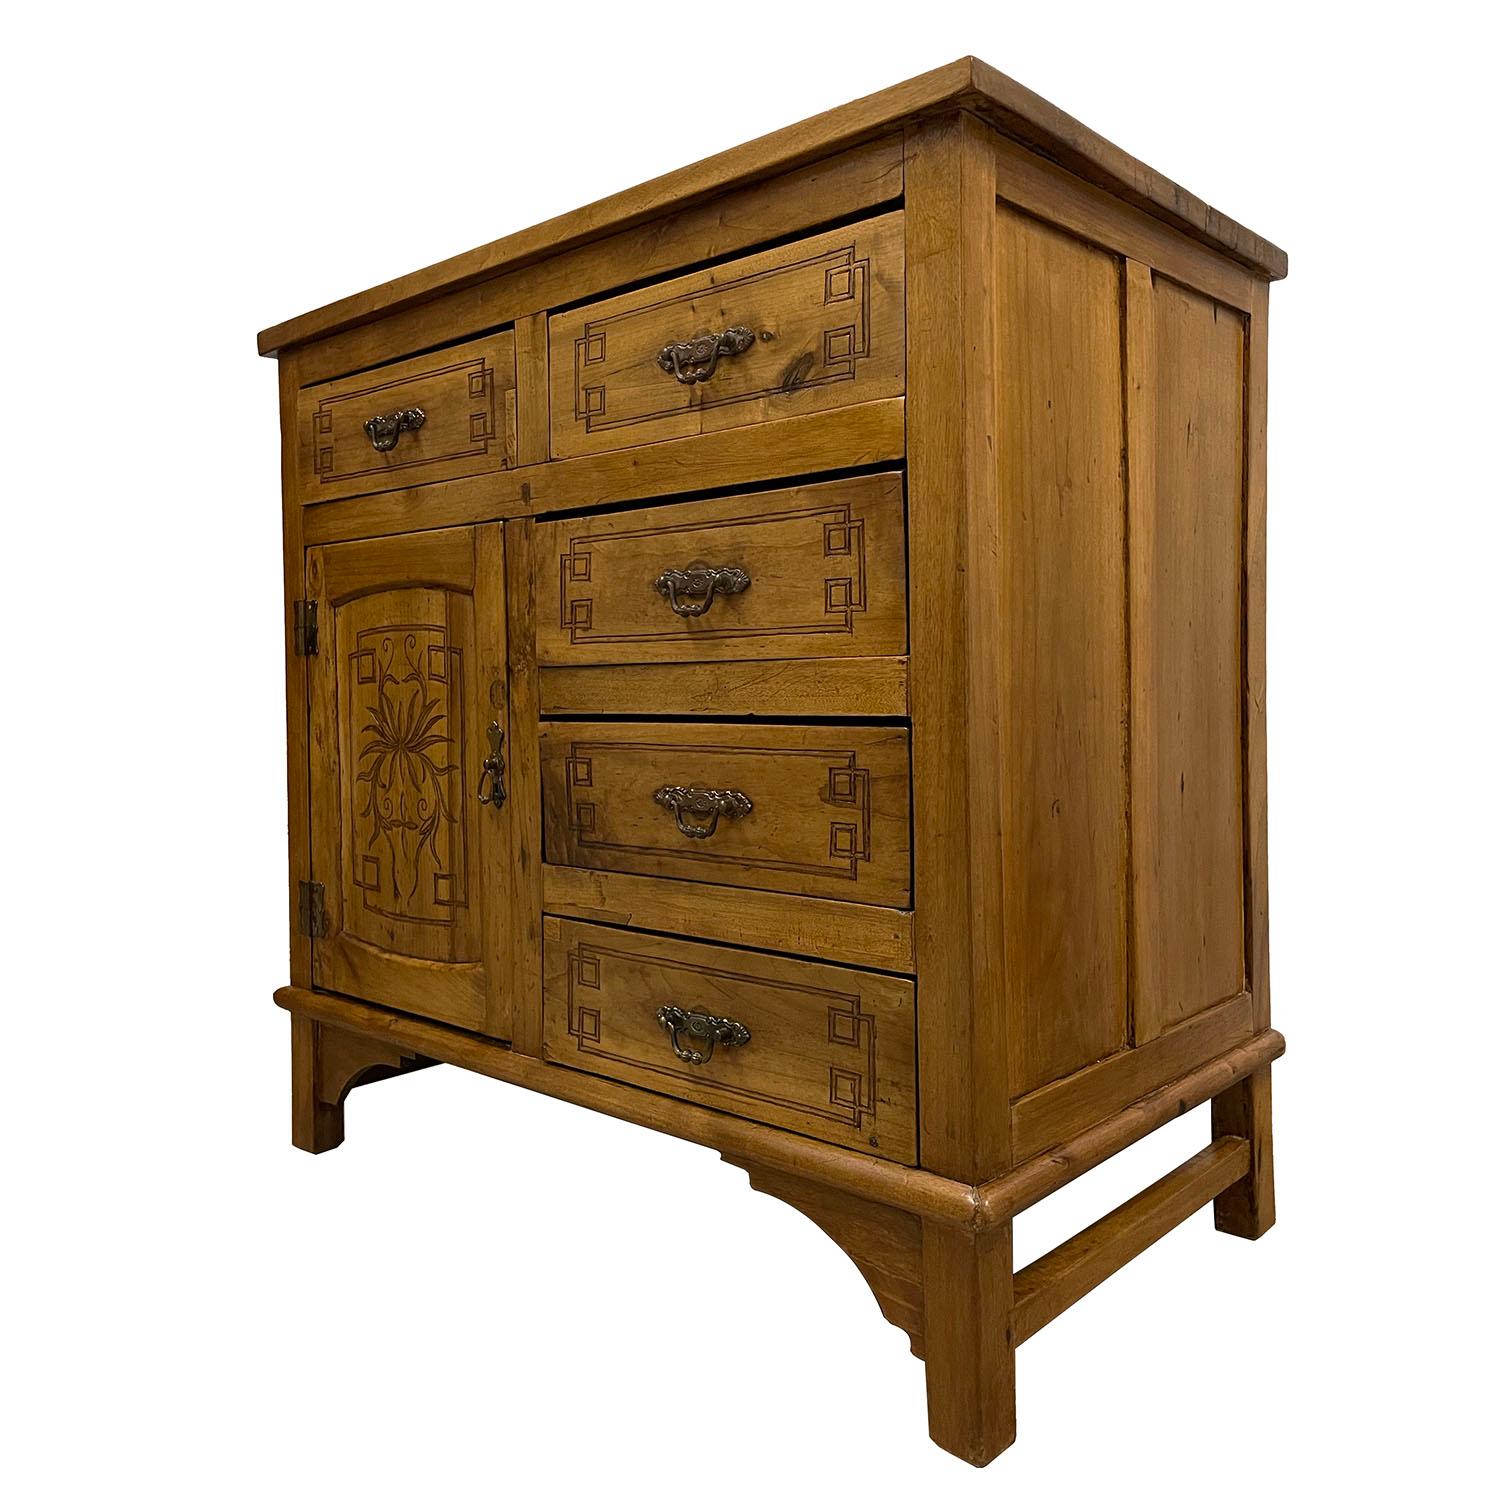 Size: 35 1/2in H x 37in W x 20 1/2in D
Drawer: Top: 4 1/4in H x 14in W x 17in D each
 Side: 4 1/4in H x 14 1/2in W x 17 1/2in D each
Origin China Circa: 1900 - 1940
Material: Nam Mao (Nam Mu) wood
Condition: Solid wood construction, finished on